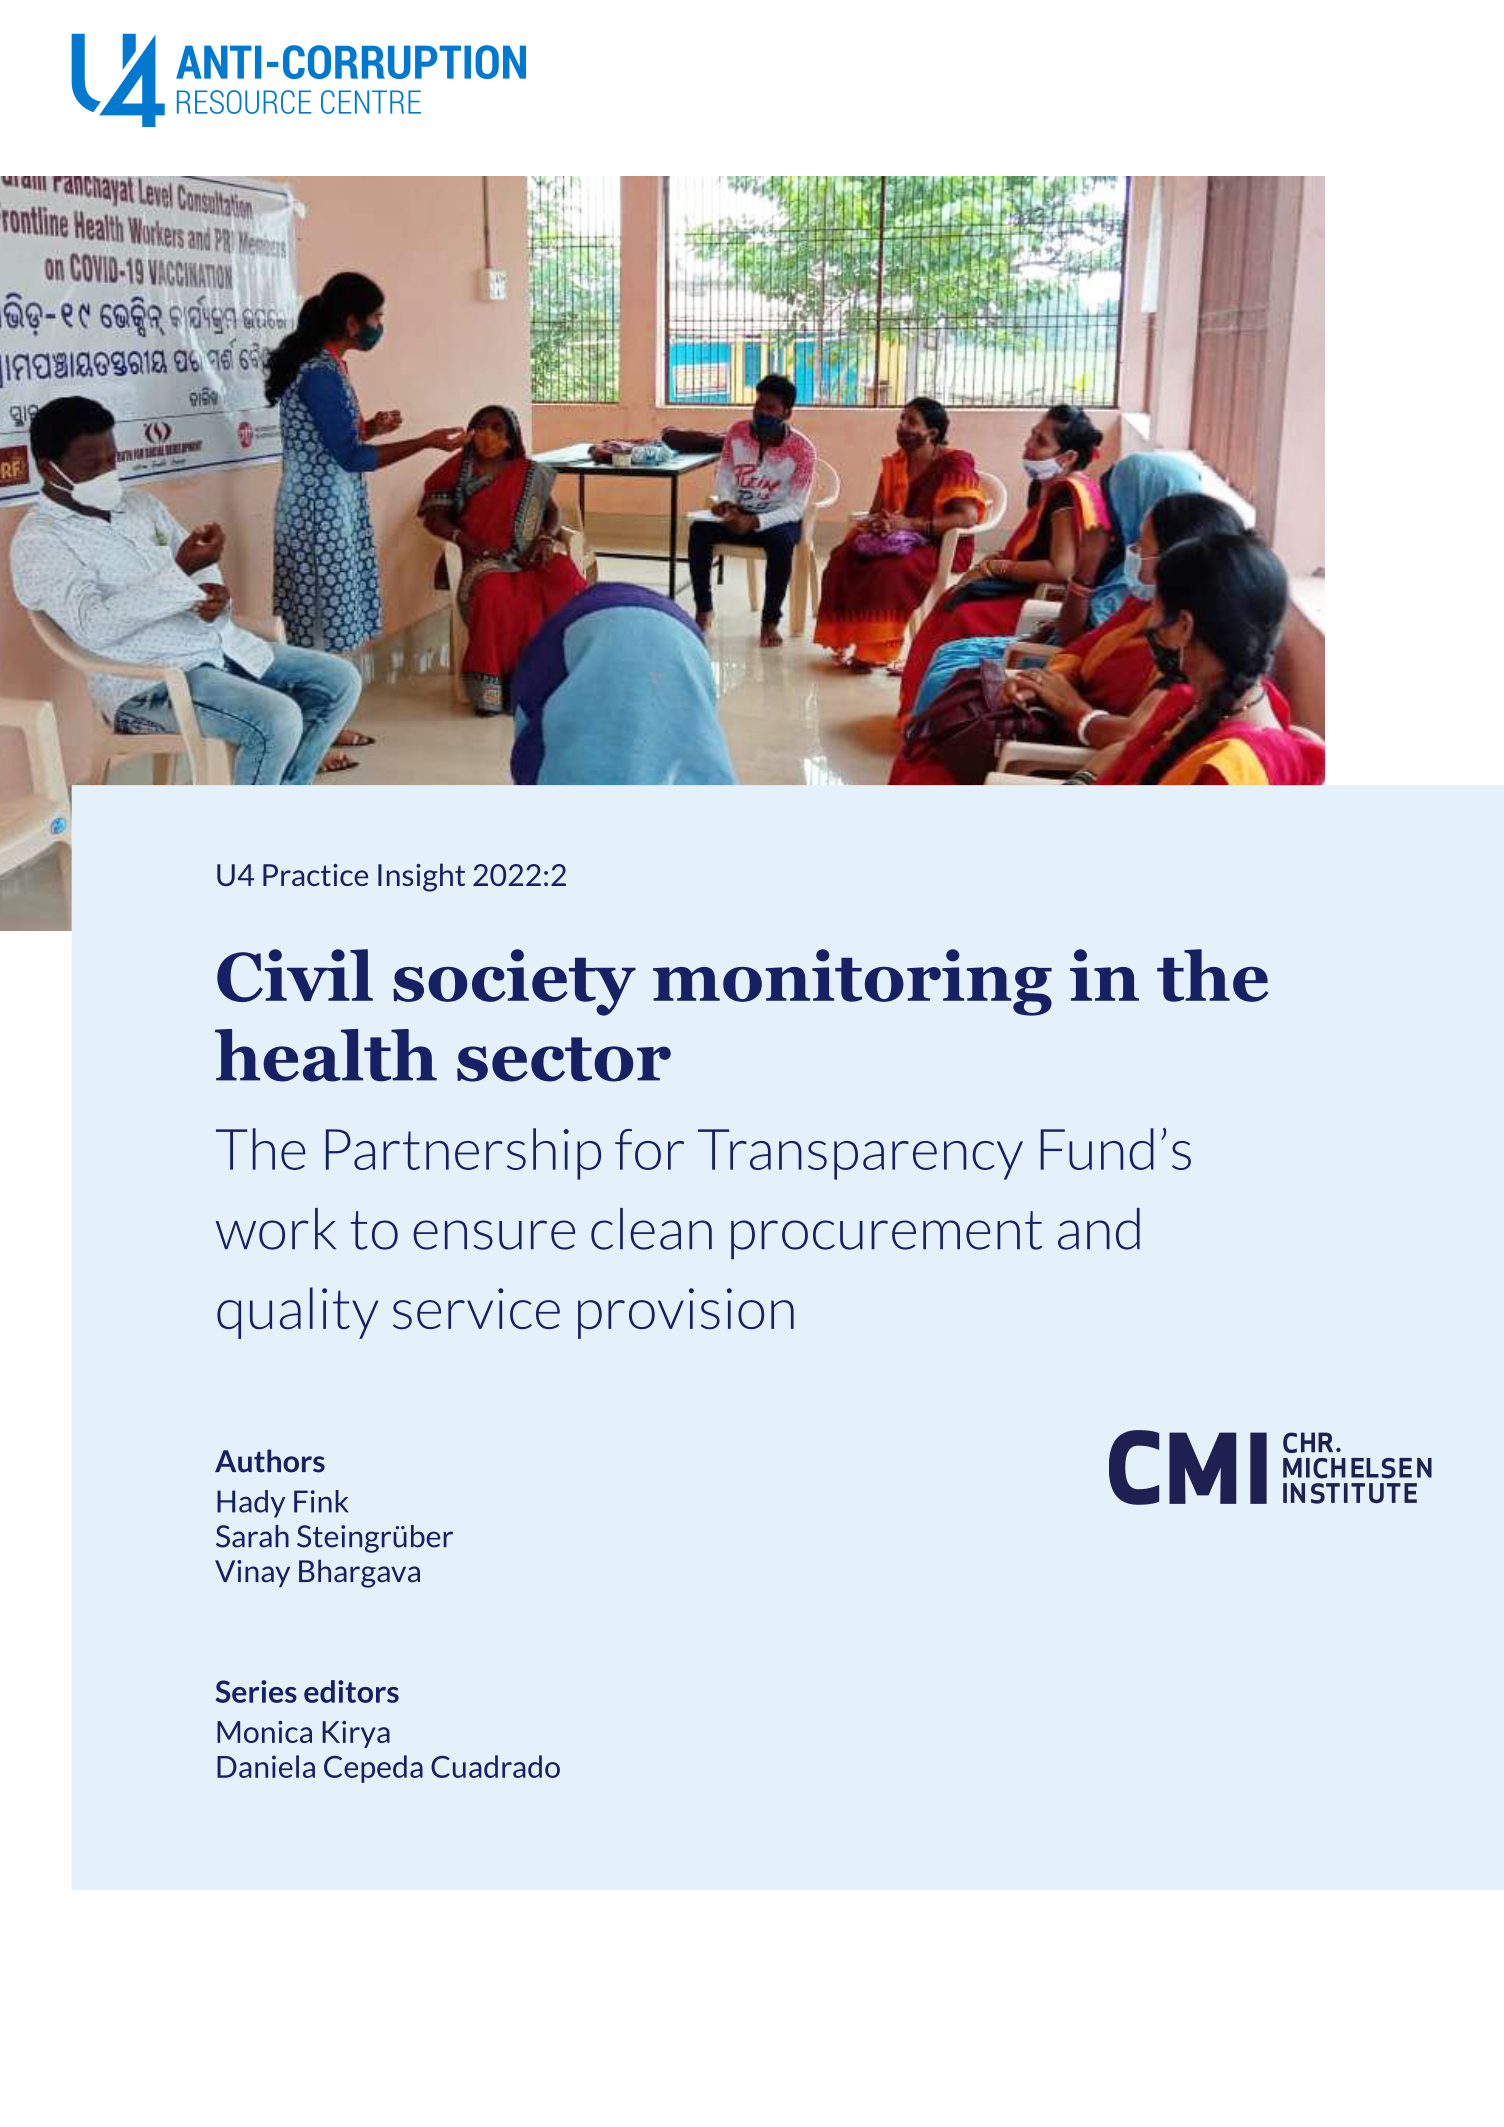 Civil society monitoring in the health sector